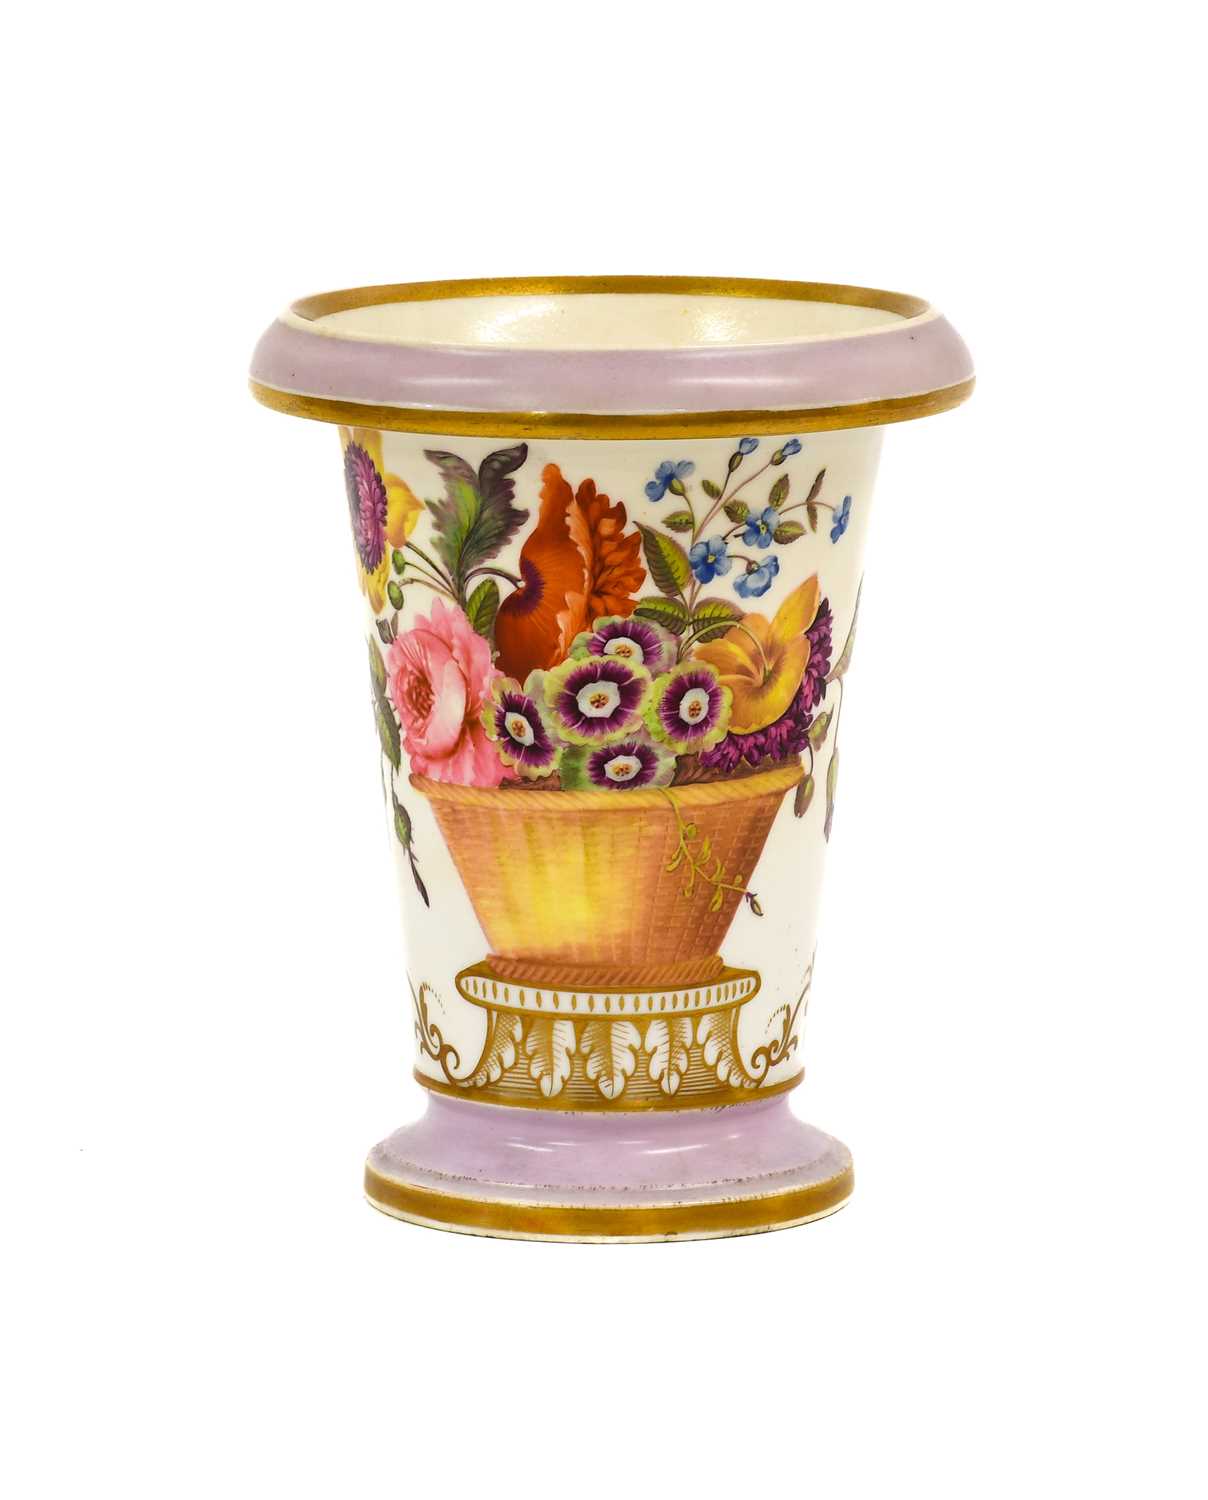 A Swansea-Style Porcelain Spill Vase, circa 1815, of flared form with everted rim, painted with